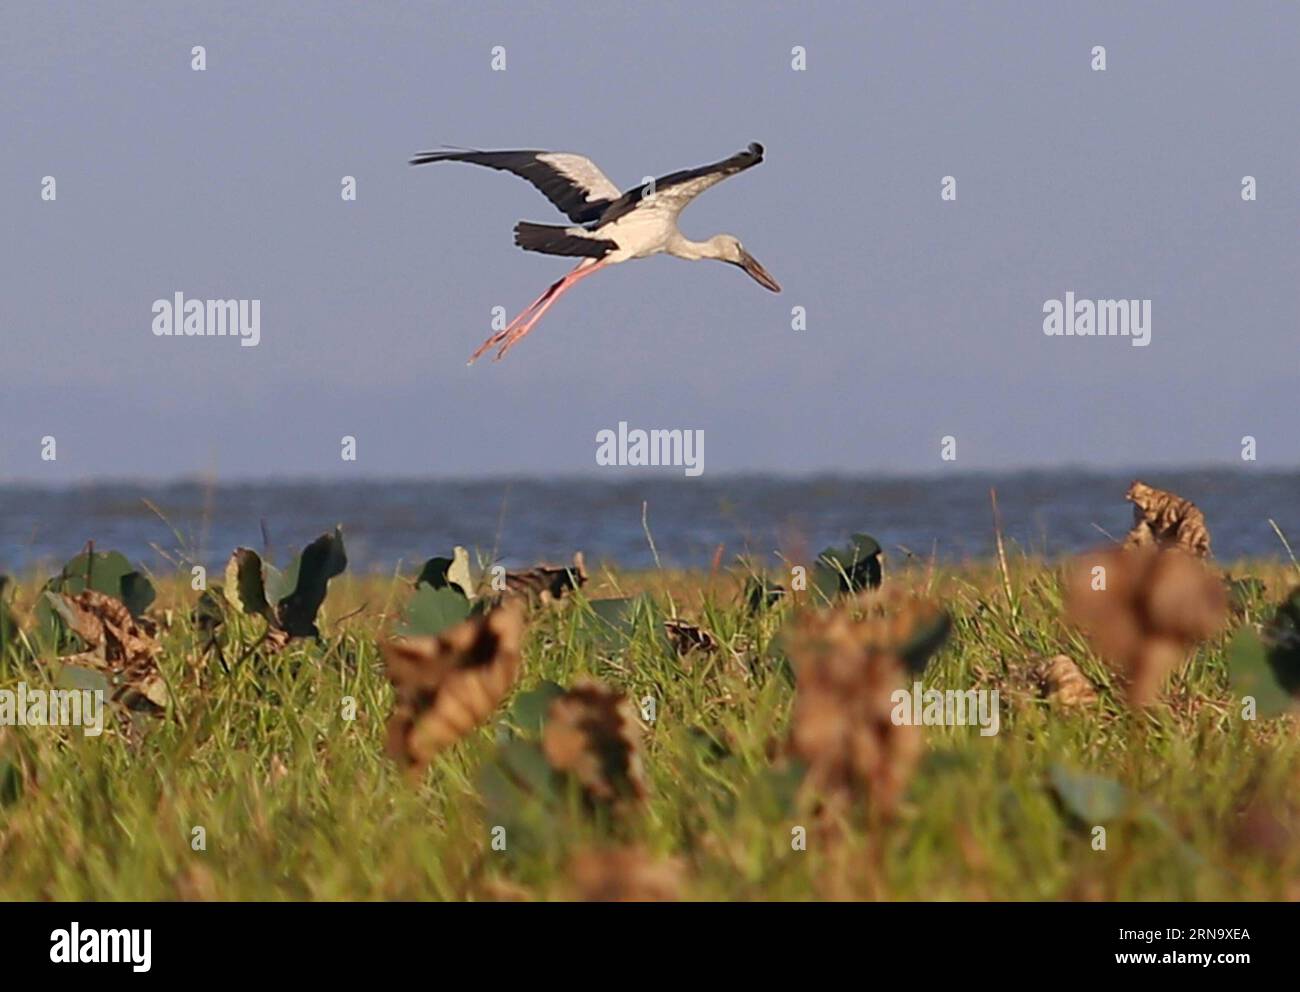 (151223) -- BAGO, Dec. 23, 2015 -- Photo taken on Dec. 23, 2015 shows an Asian openbill flying over Moeyungyi Wetland Wildlife Sanctuary in Bago region, Myanmar. Moeyungyi Wetlands is situated in Bago Division. Every year, millions of birds usually fly from the northern hemisphere to the south along the East-Asian Australian Flyway to escape from winter. They stop to rest and feed in Asia. So the flyway contains a network of wetlands and Moeyungyi is one of which could cooperate to certain migrated as well as domestic birds. ) MYANMAR-BAGO-WETLAND-WILDLIFE UxAung PUBLICATIONxNOTxINxCHN   15122 Stock Photo